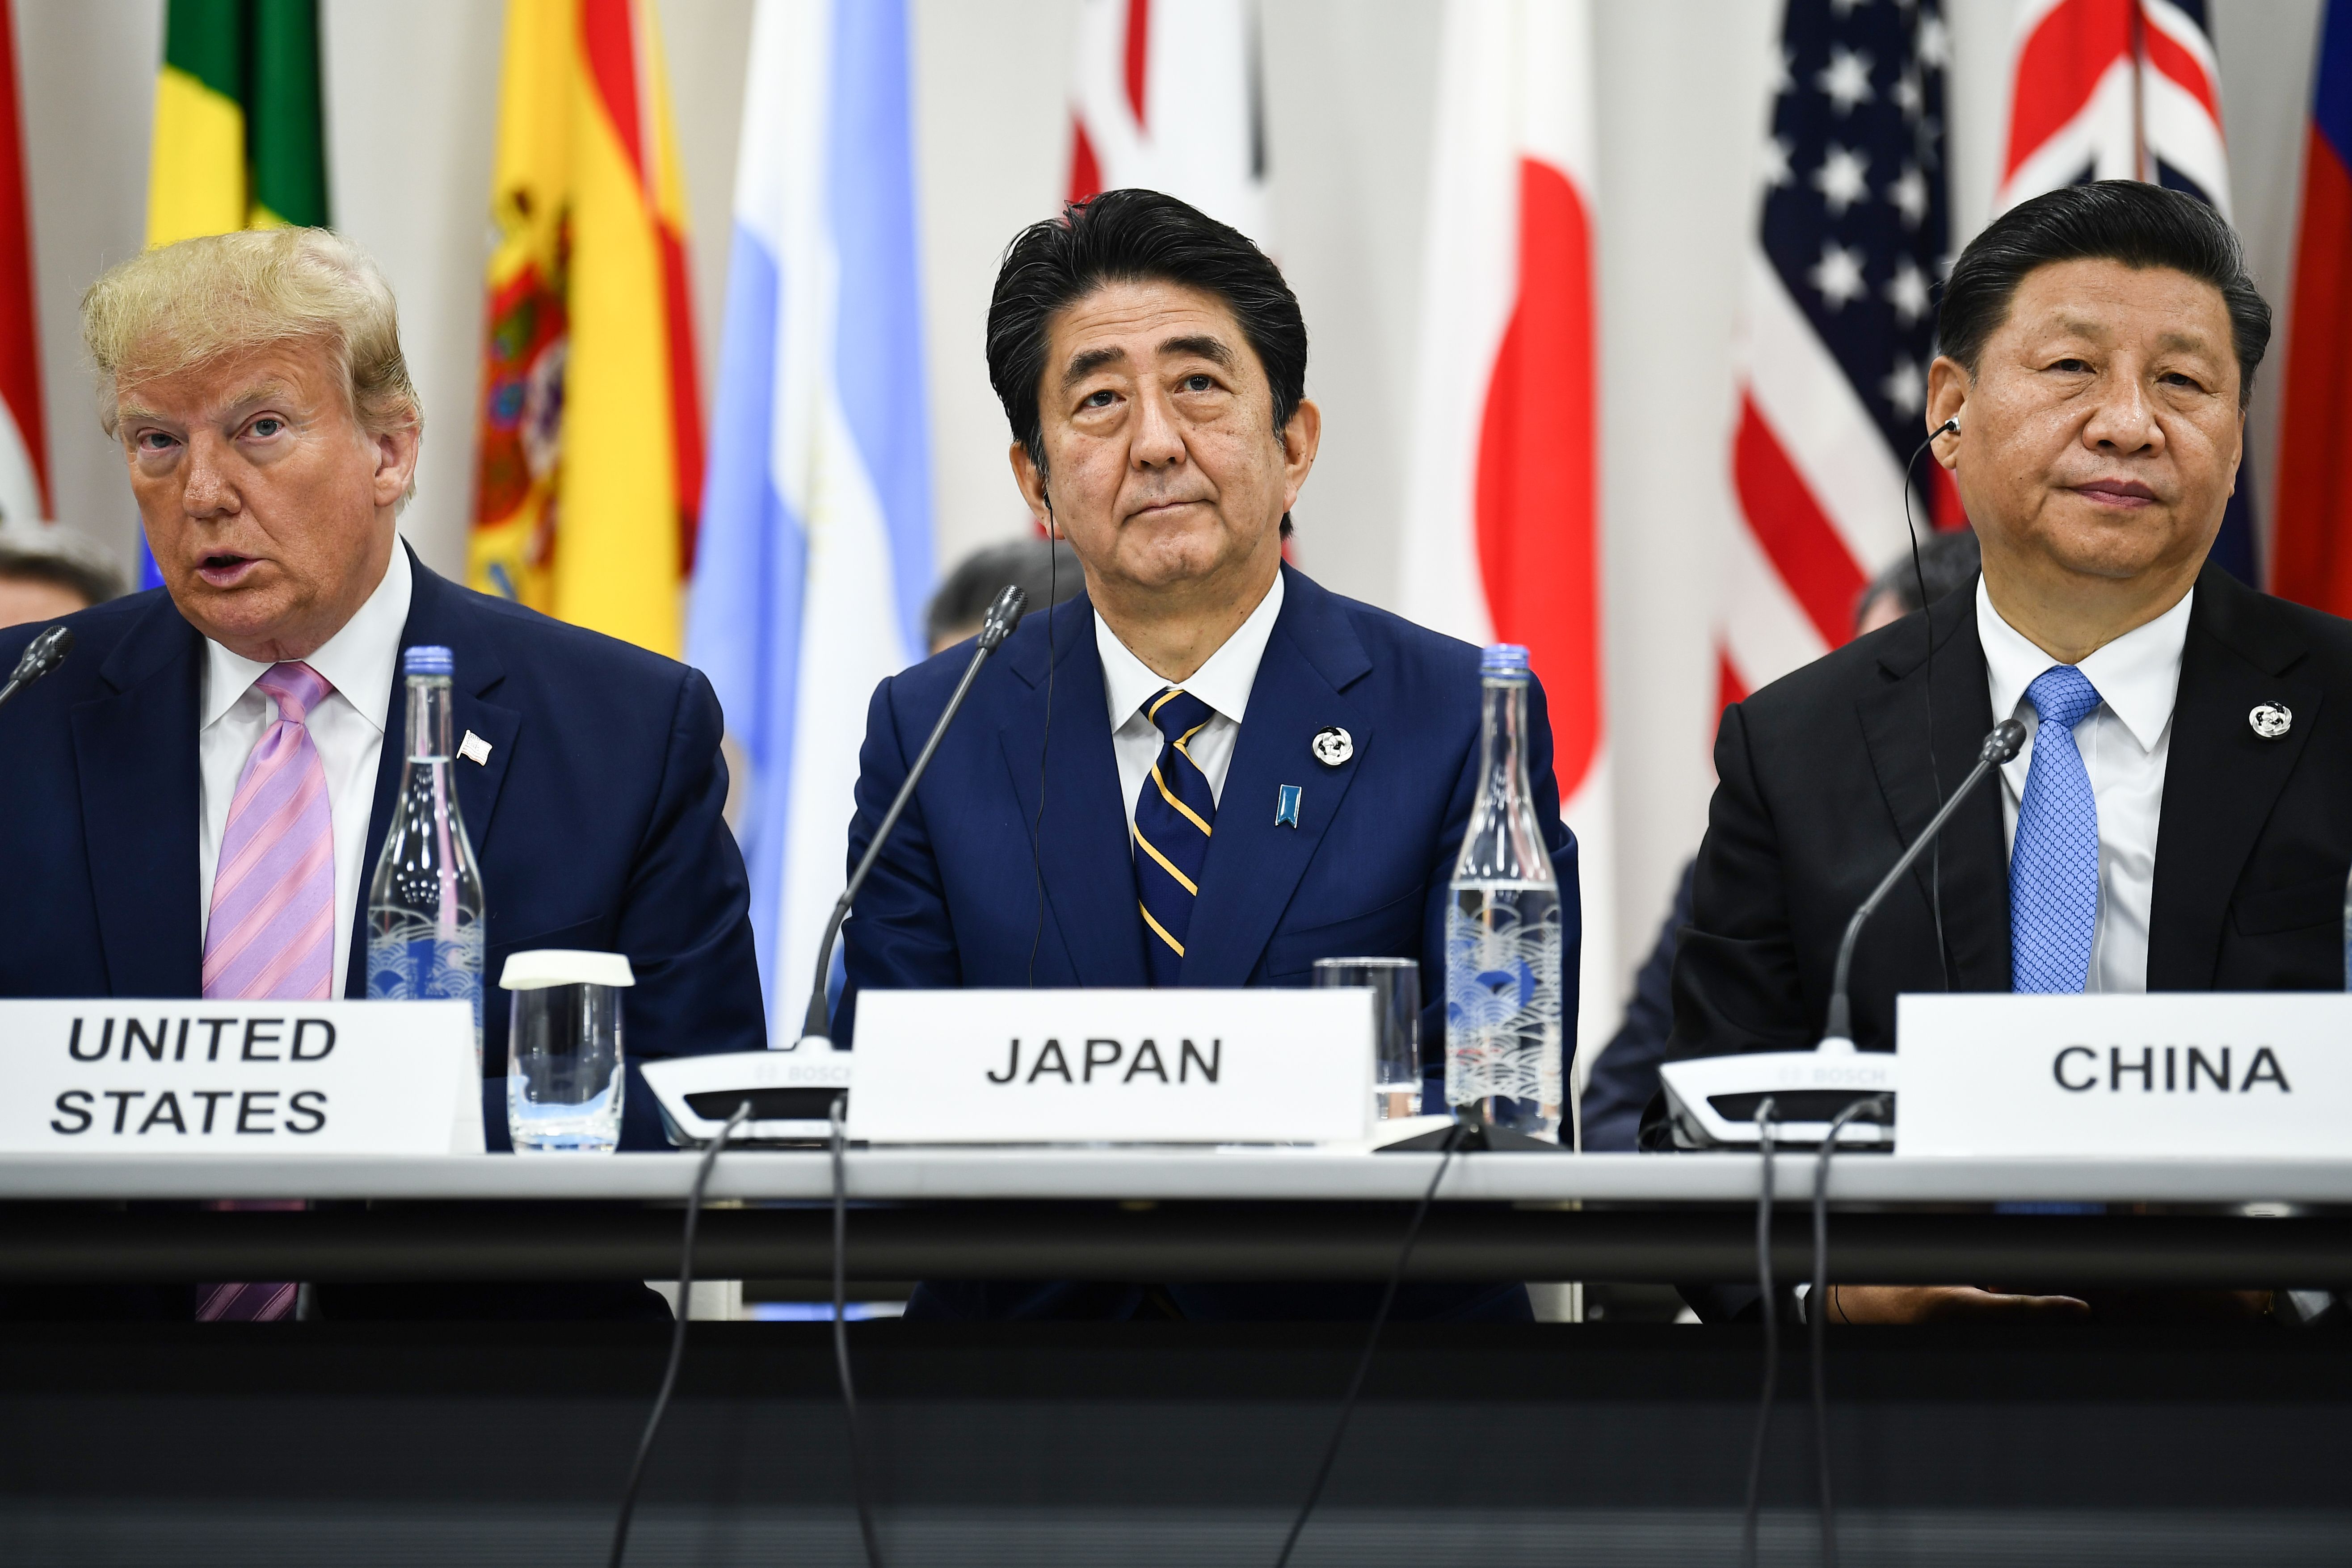 US President Donald Trump, Japan's Prime Minister Shinzo Abe and China's President Xi Jinping attend a meeting at the G20 Summit in Osaka on June 28.